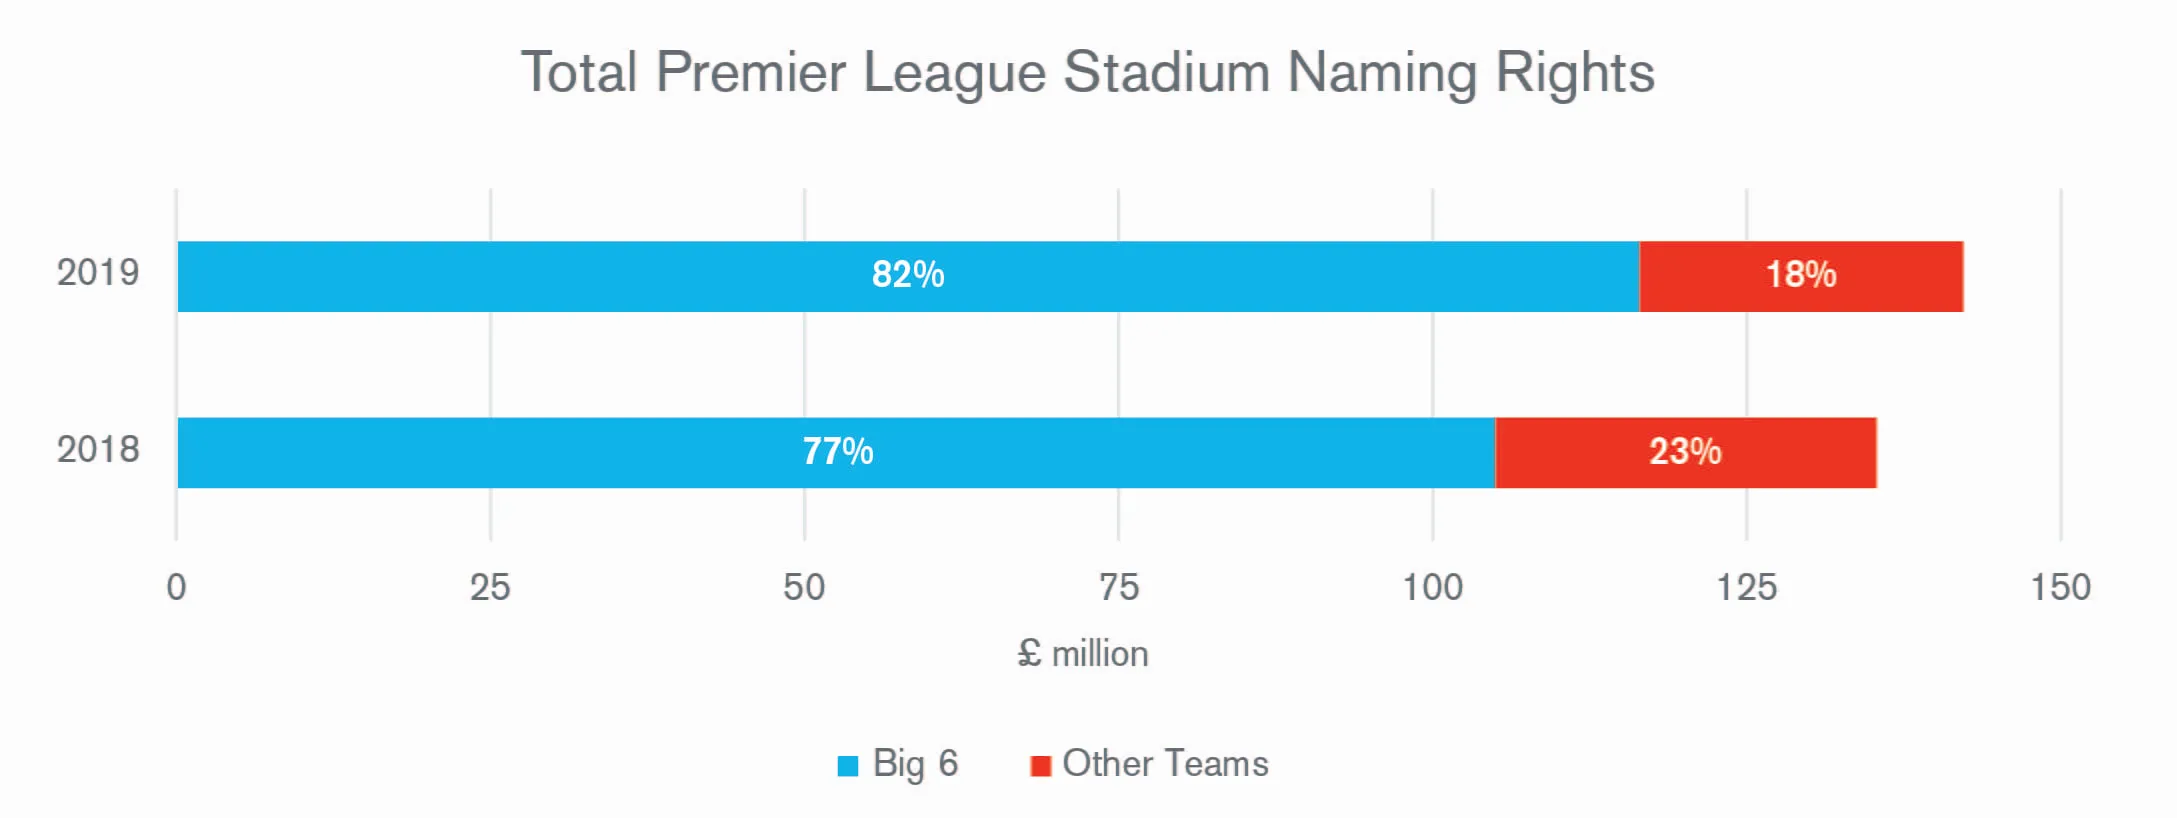 Total Premier League Stadium Naming Rights